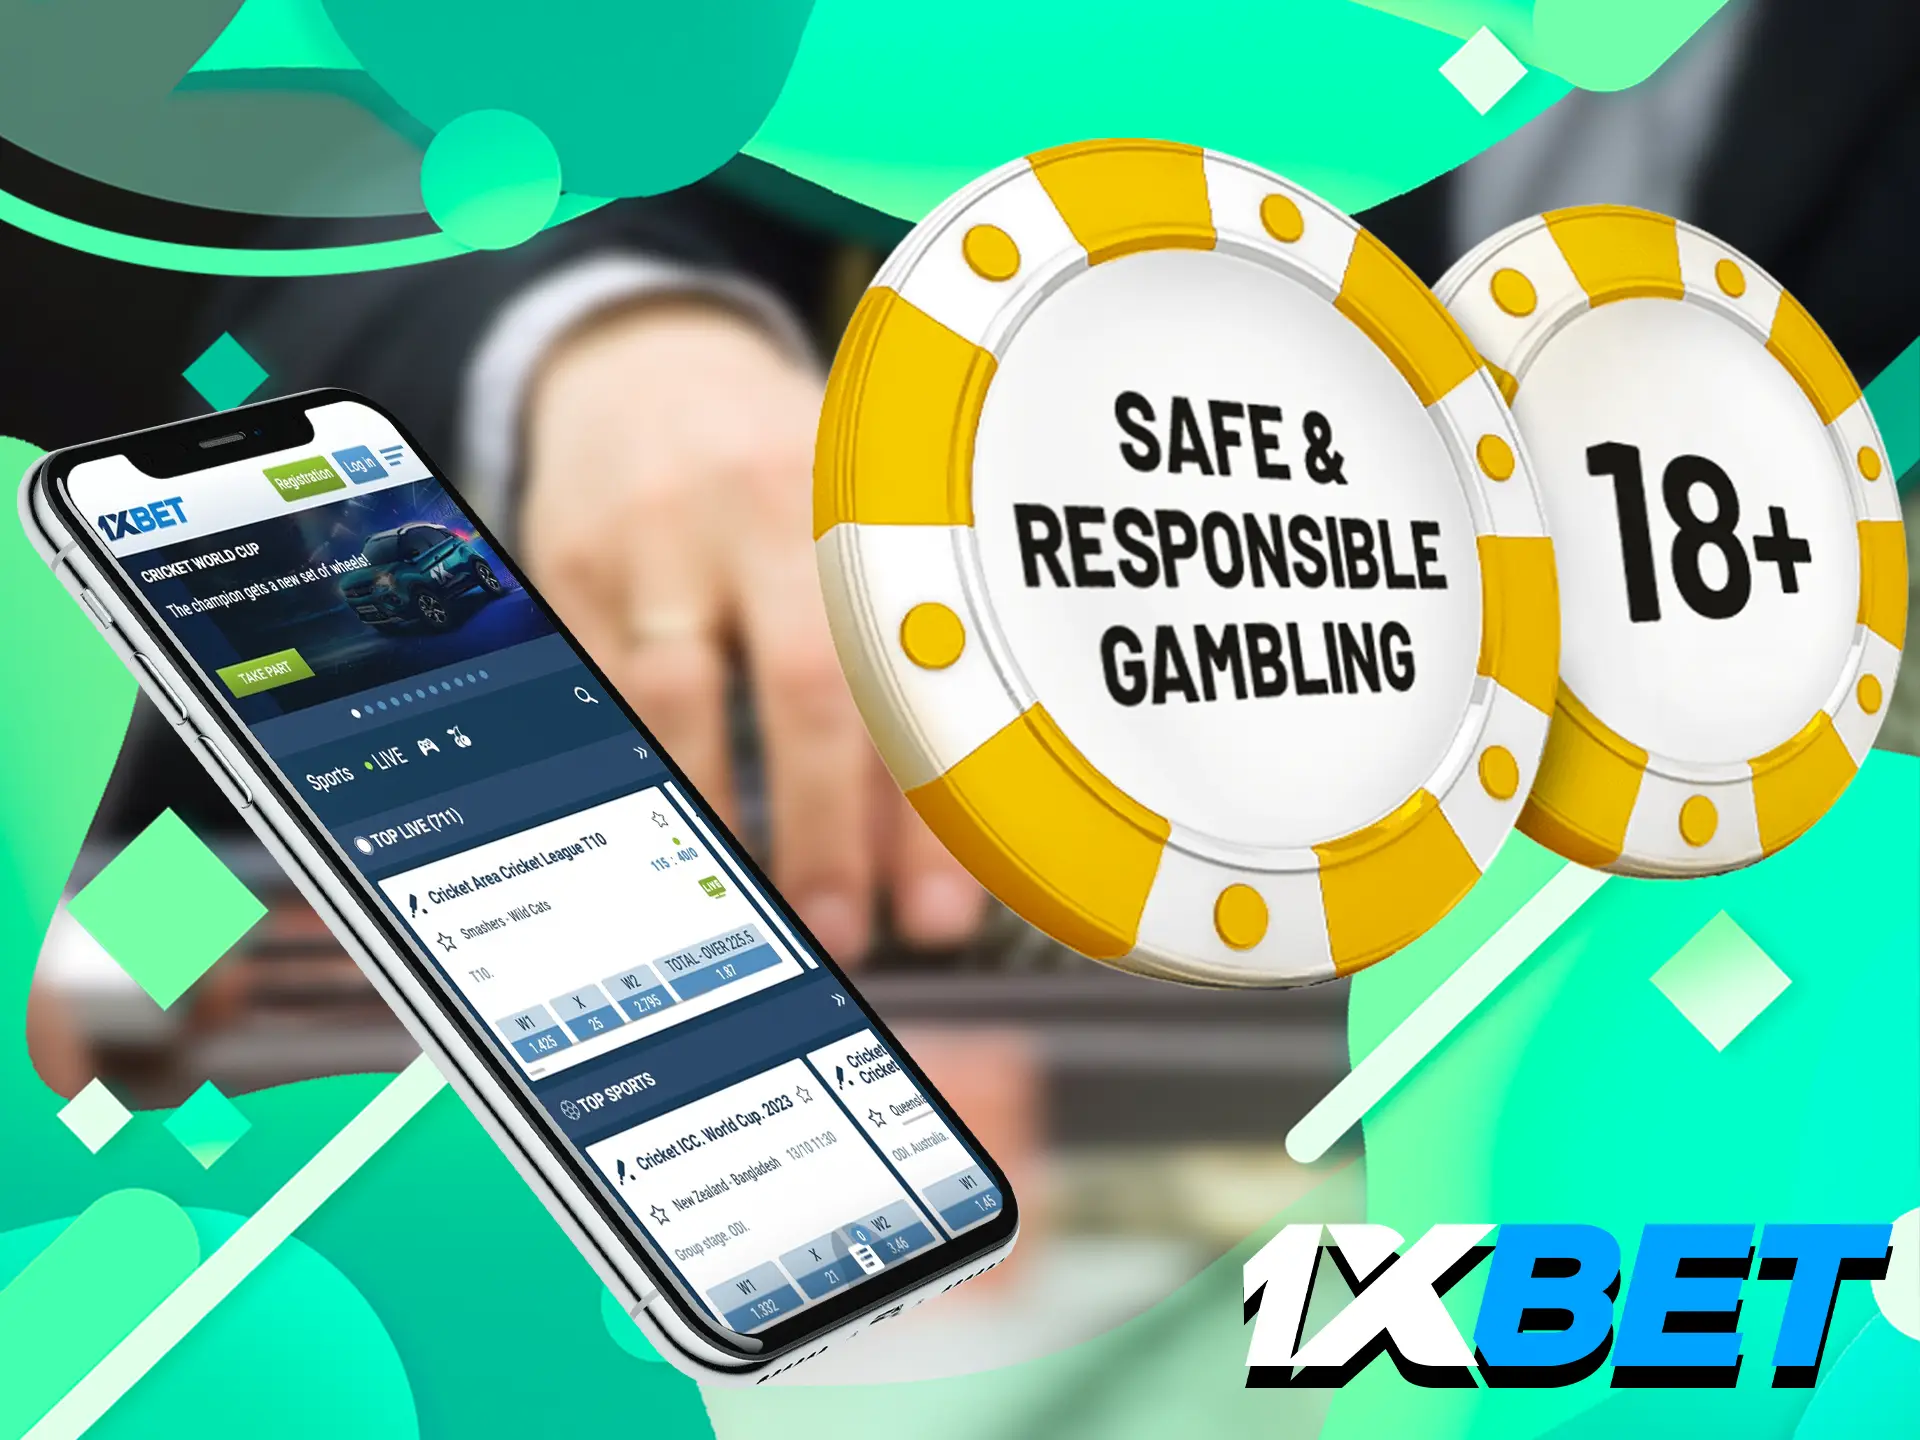 If a player notices that he has started spending more money than usual, he should limit his gambling, as uncontrolled gambling leads to addiction.